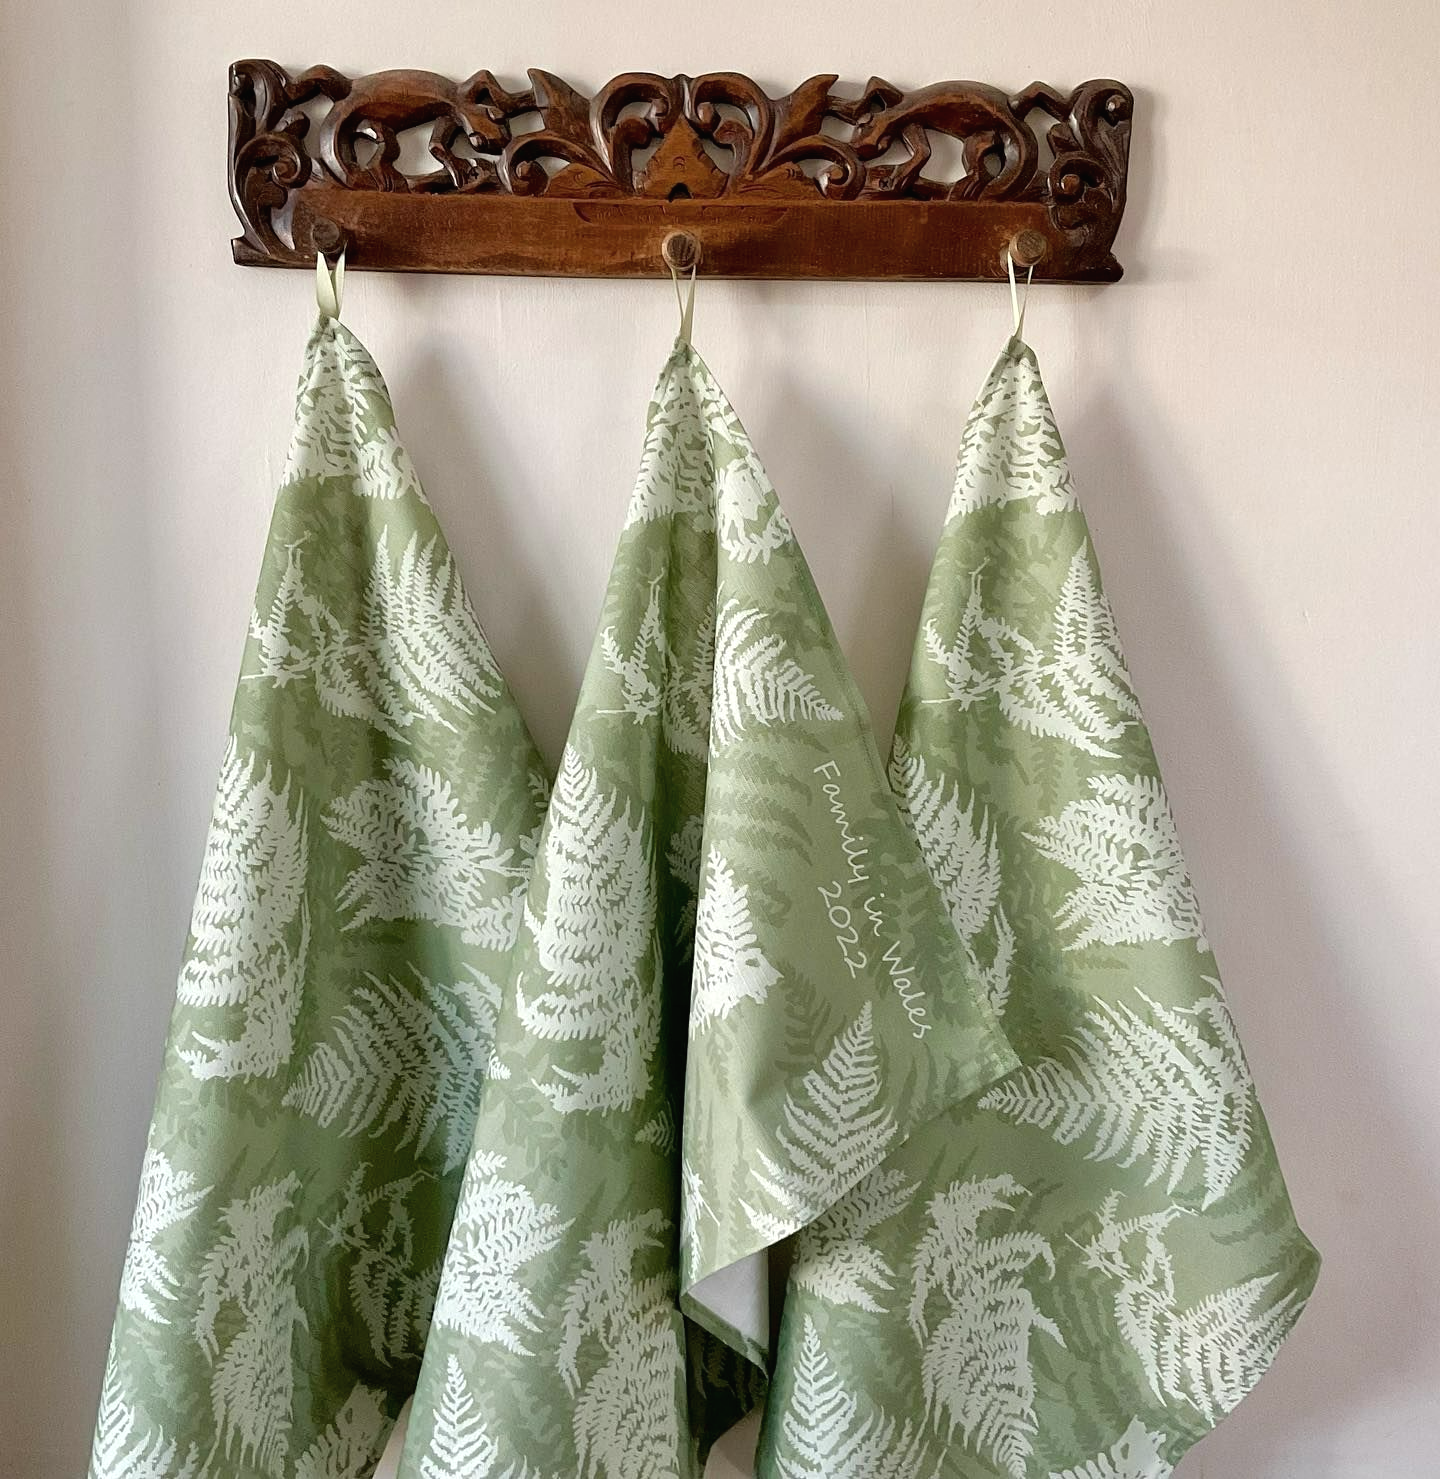 Three green tea towels hang off pegs. They are green with a fern leaf print